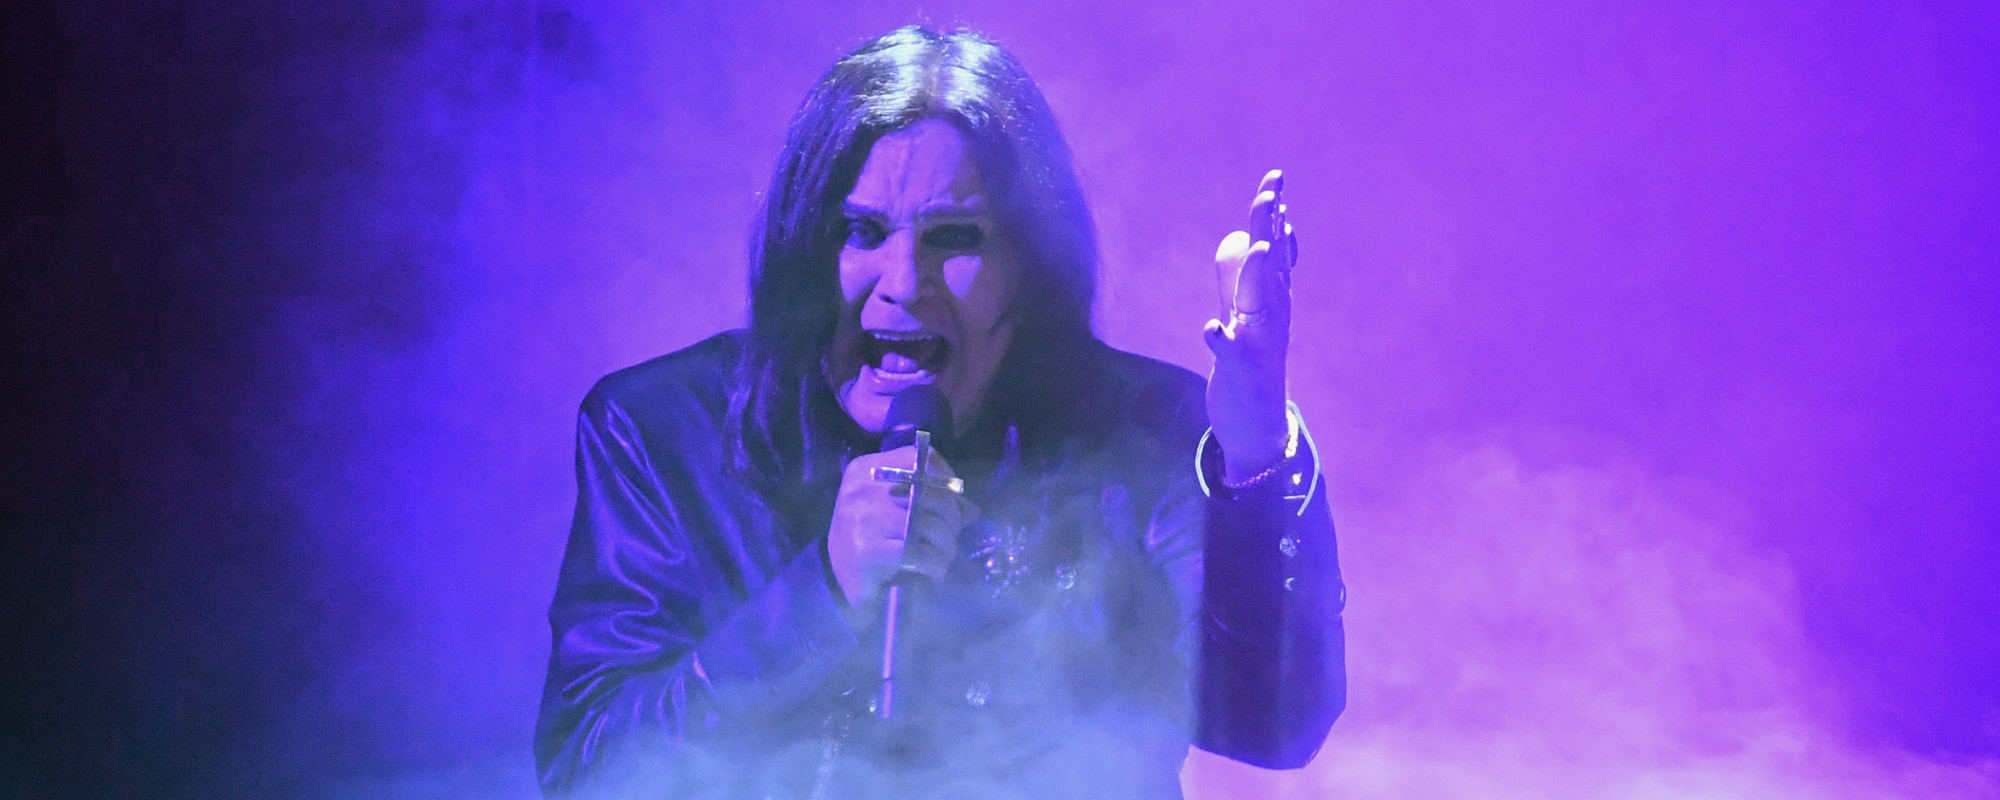 Ozzy Osbourne Vows “I’m Not Going Any F*cking Where” Amid Death Hoax, Says New Gigs Are Coming